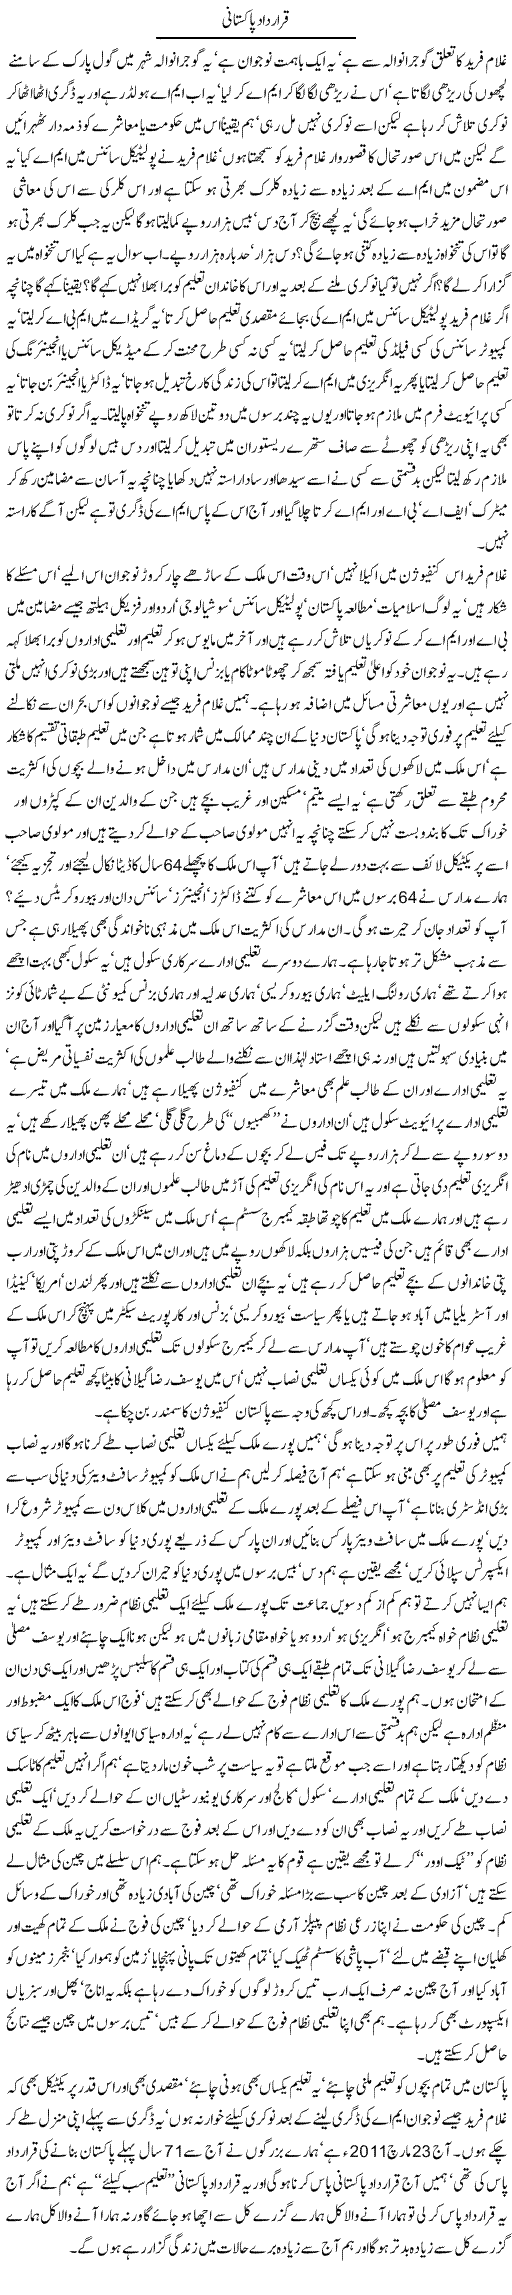 Pakistan Resolution Express Column Javed Chaudhry 24 March 2011